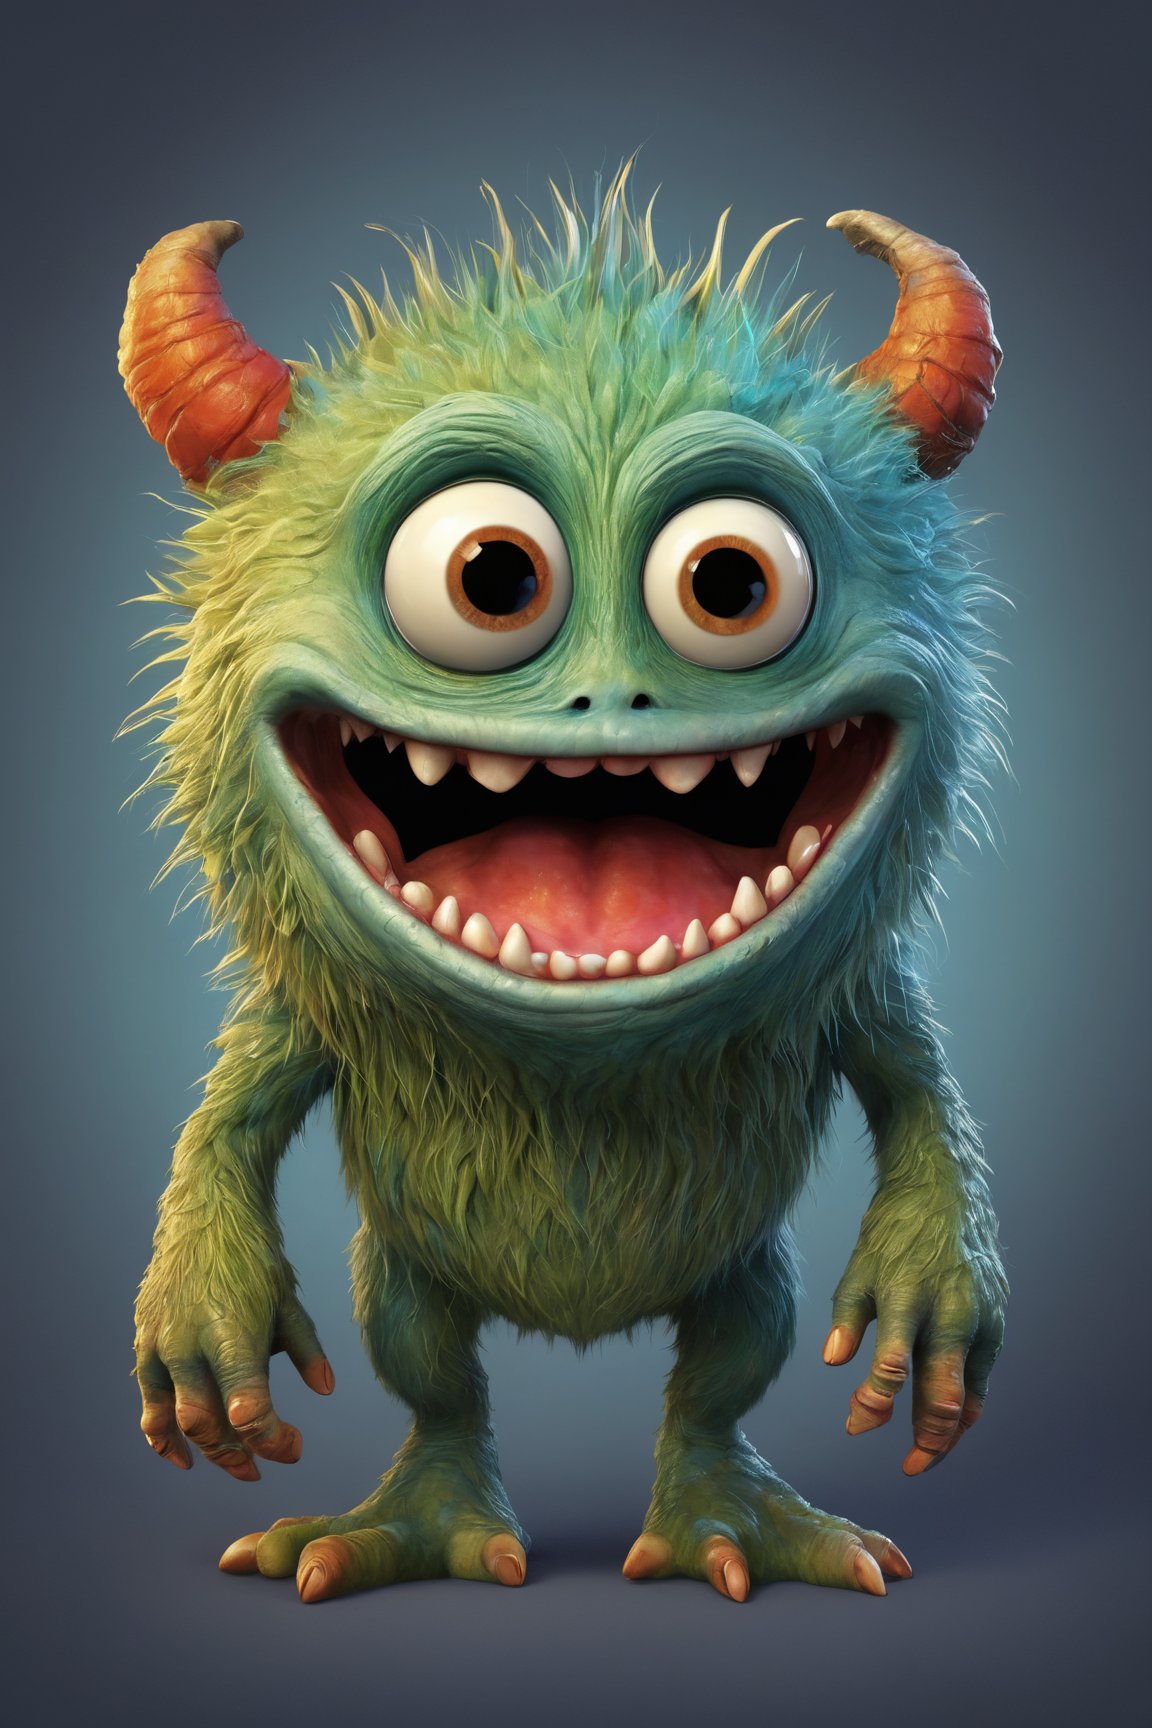 (best quality,8K,highres,masterpiece), ultra-detailed, capturing the whimsical essence of a cute, tiny monster with a distinctly creepy smile. This creature, while small in stature, boasts an array of vibrant colors and textures, making it stand out with its unique charm. Despite its eerie grin, there's an undeniable allure to its appearance, blending elements of the adorable with the slightly unsettling. The monster's eyes sparkle with mischief, suggesting a playful nature behind its unnerving smile. Its skin is highly textured, showcasing an array of soft, pastel shades that contrast with the darker, more mysterious tones of its grin. The background is deliberately blurred, focusing attention on the creature's expressive face and the intricate details that define its character. This portrayal combines the innocent with the eerie, inviting viewers into a world where even the smallest monsters carry a mix of cuteness and mystery.